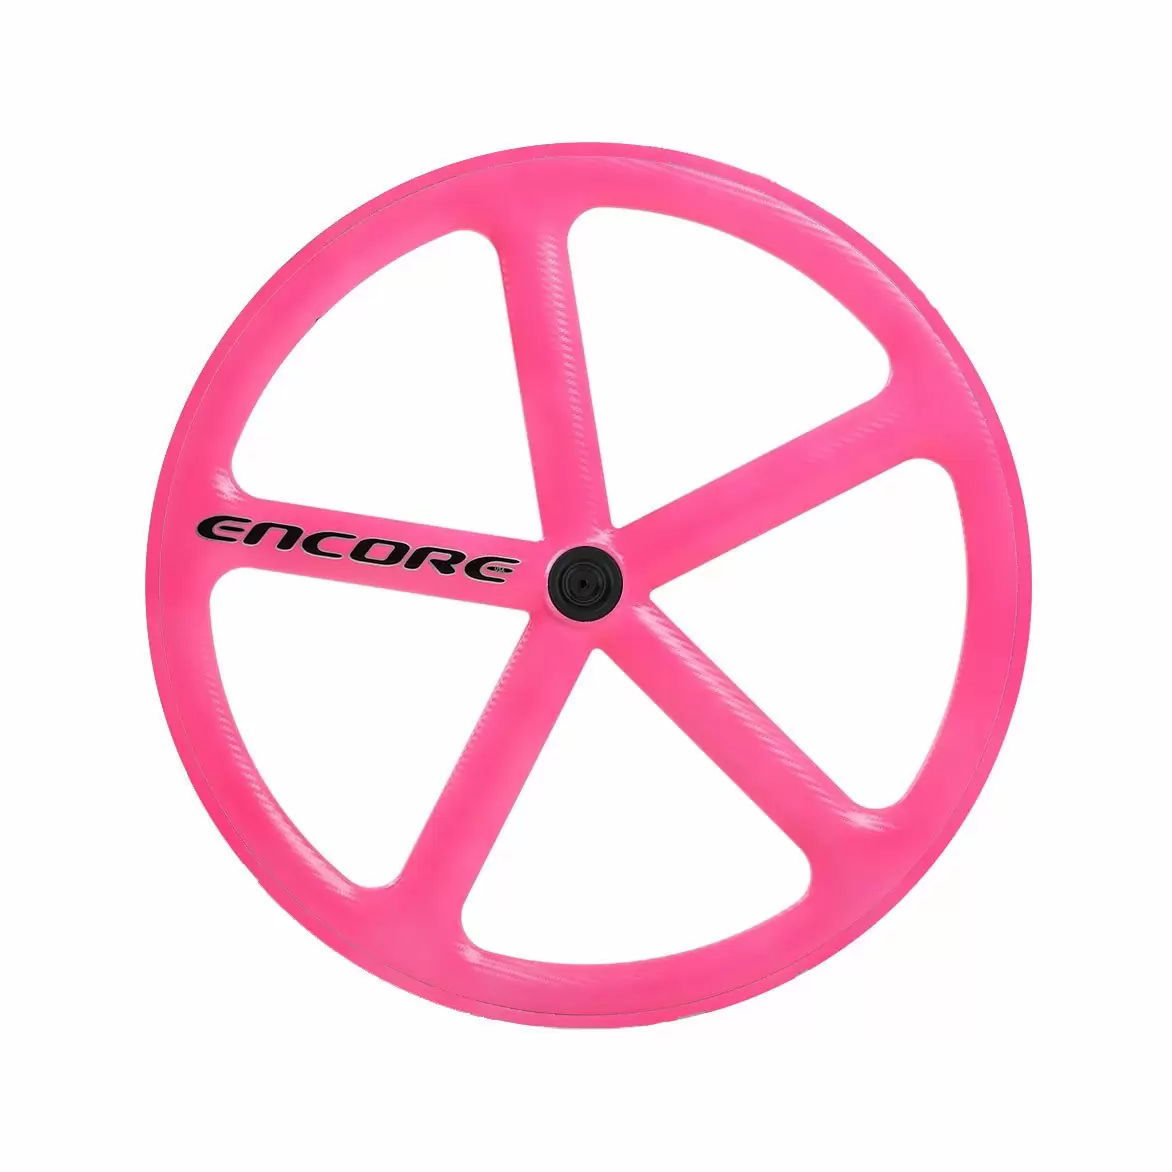 rear wheel 700c track 5 spokes carbon weave neon pink nmsw - image